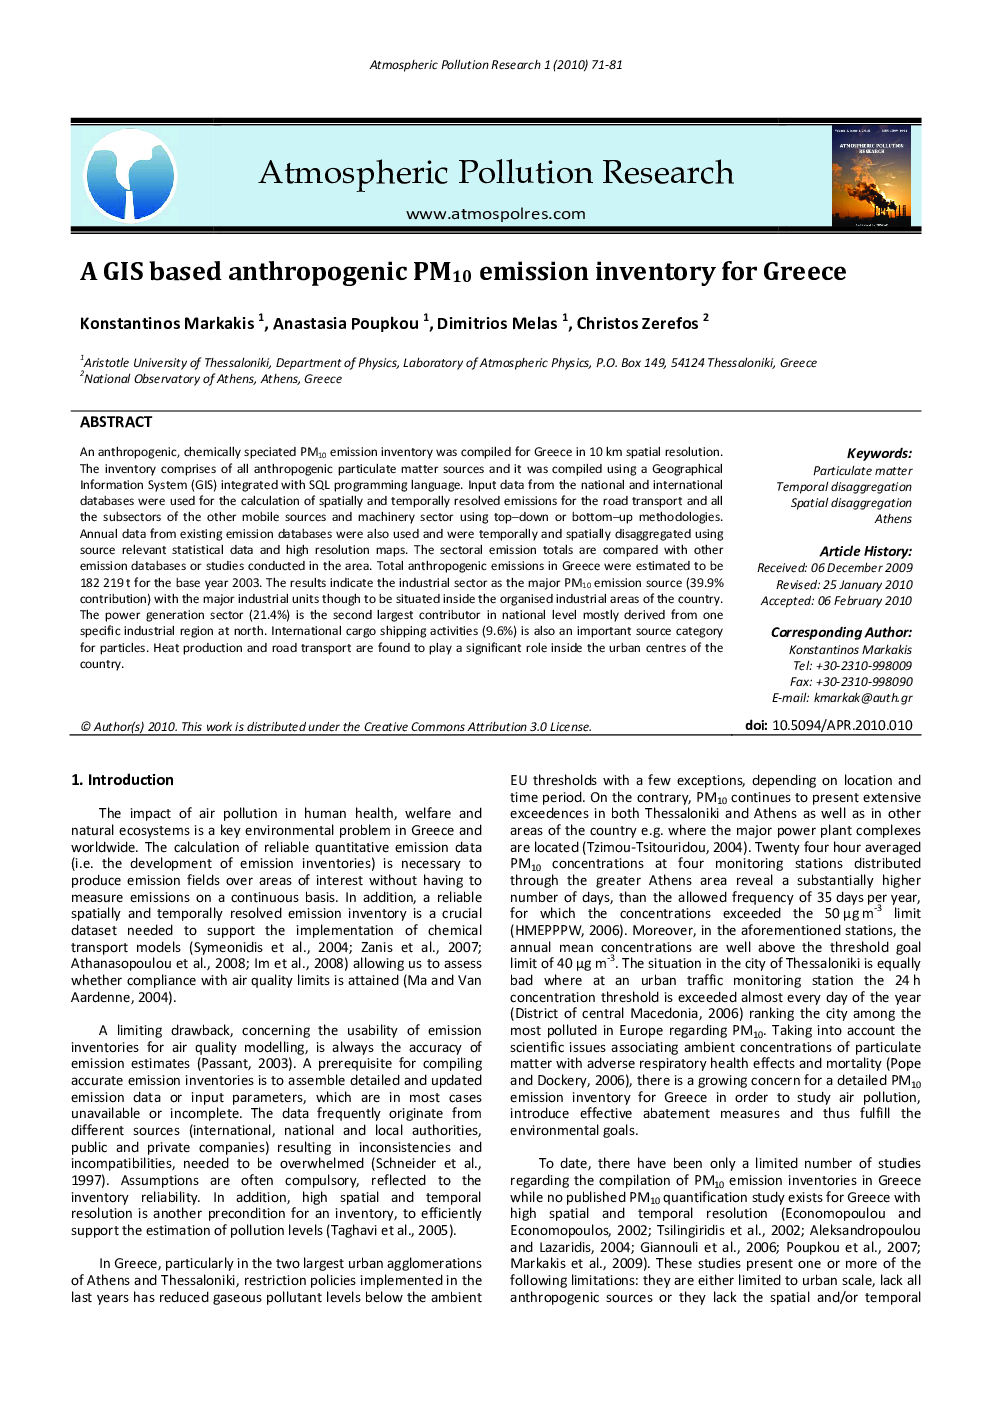 A GIS based anthropogenic PM10 emission inventory for Greece